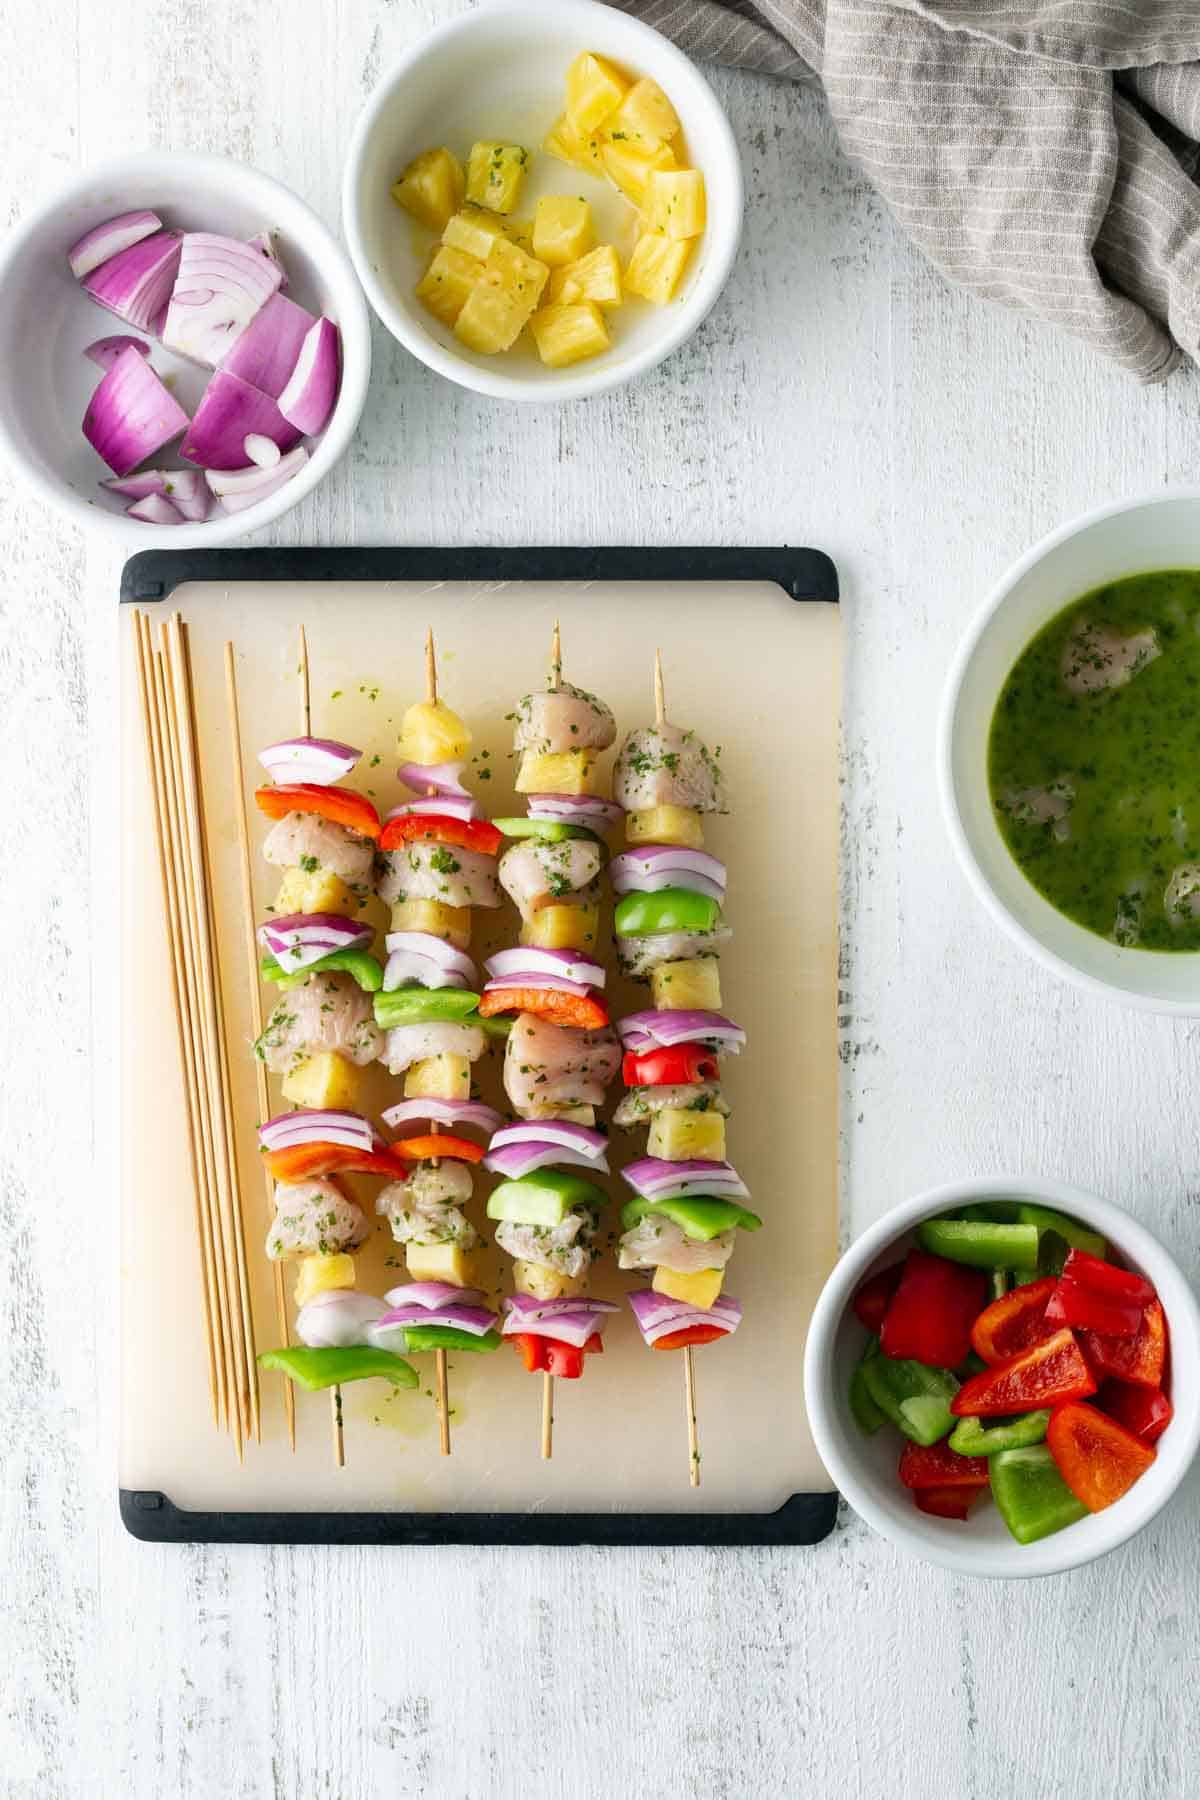 Four uncooked chicken kabobs with onions, peppers, and pineapples are arranged on a cutting board. Surrounding bowls contain additional sliced onions, diced pineapples, bell peppers, and marinade.